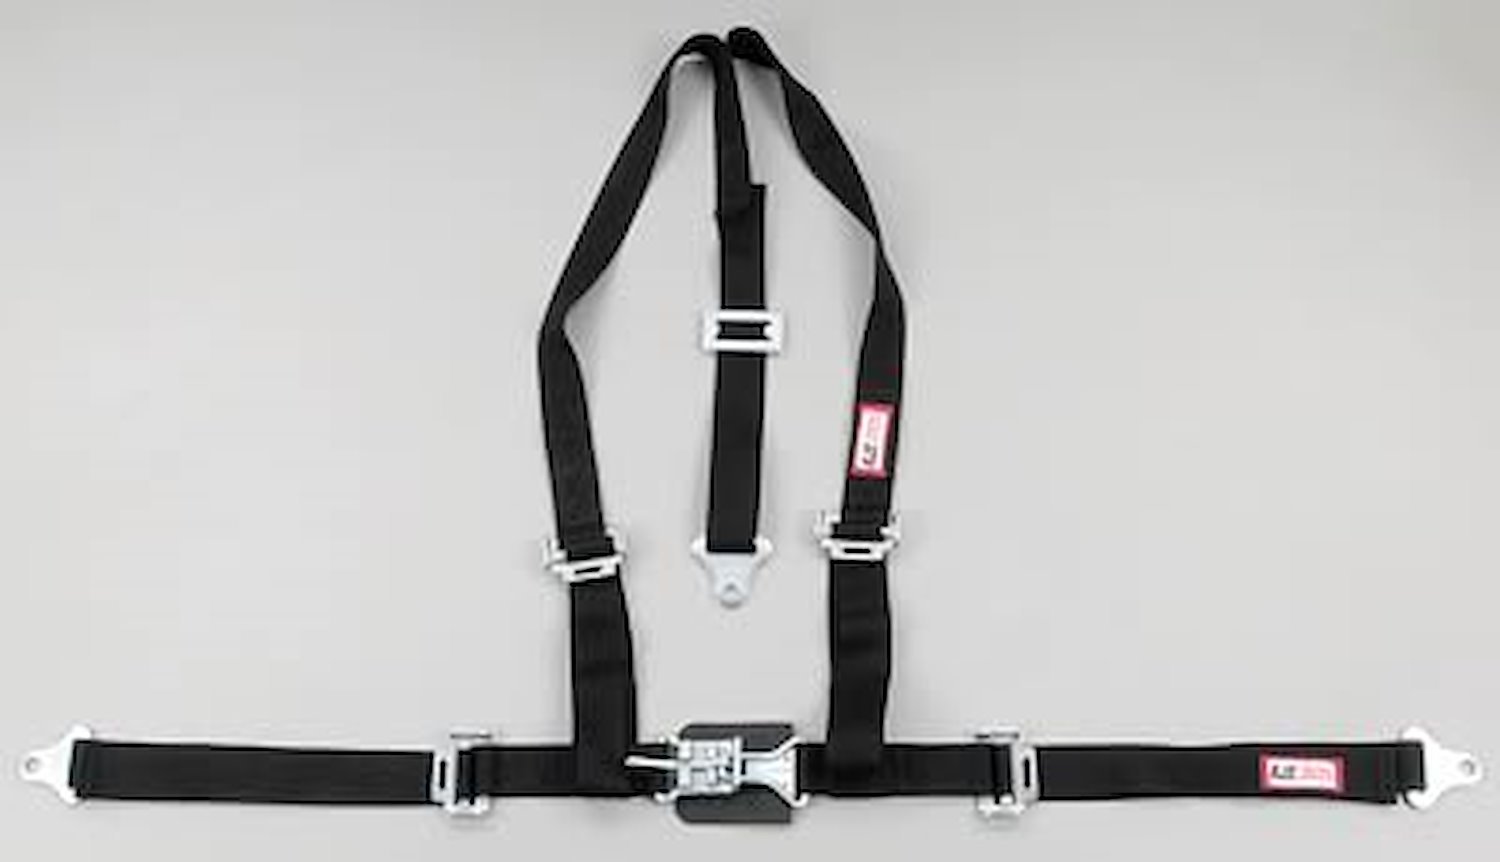 NON-SFI L&L HARNESS 3 PULL DOWN Lap BELT SNAP SEWN IN 2 S.H. Y FLOOR Mount WRAP/BOLT GRAY